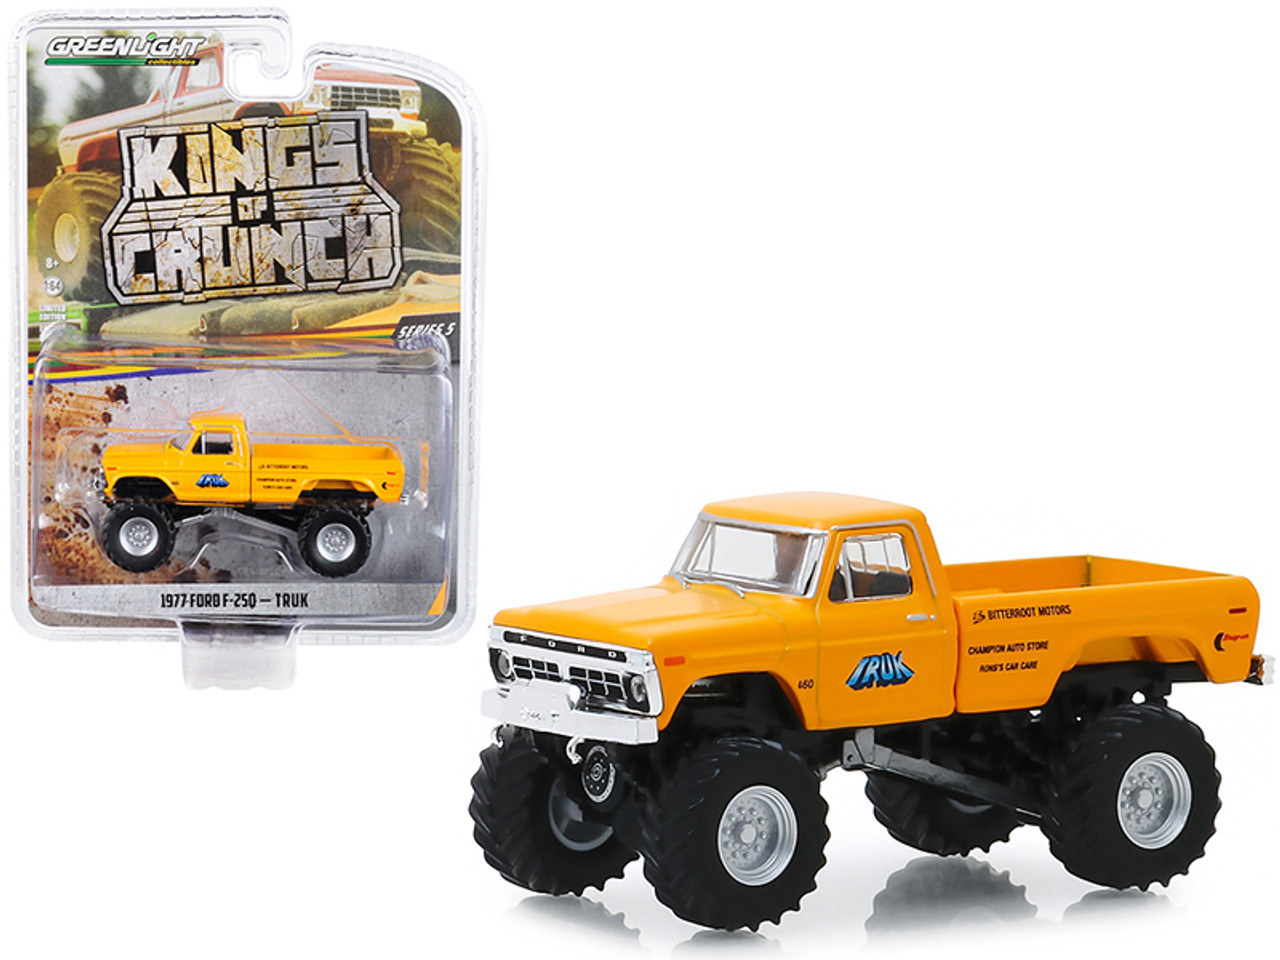 1977 Ford F-250 Monster Truck "Truk" Yellow "Kings of Crunch" Series 5 1/64 Diecast Model Car by Greenlight